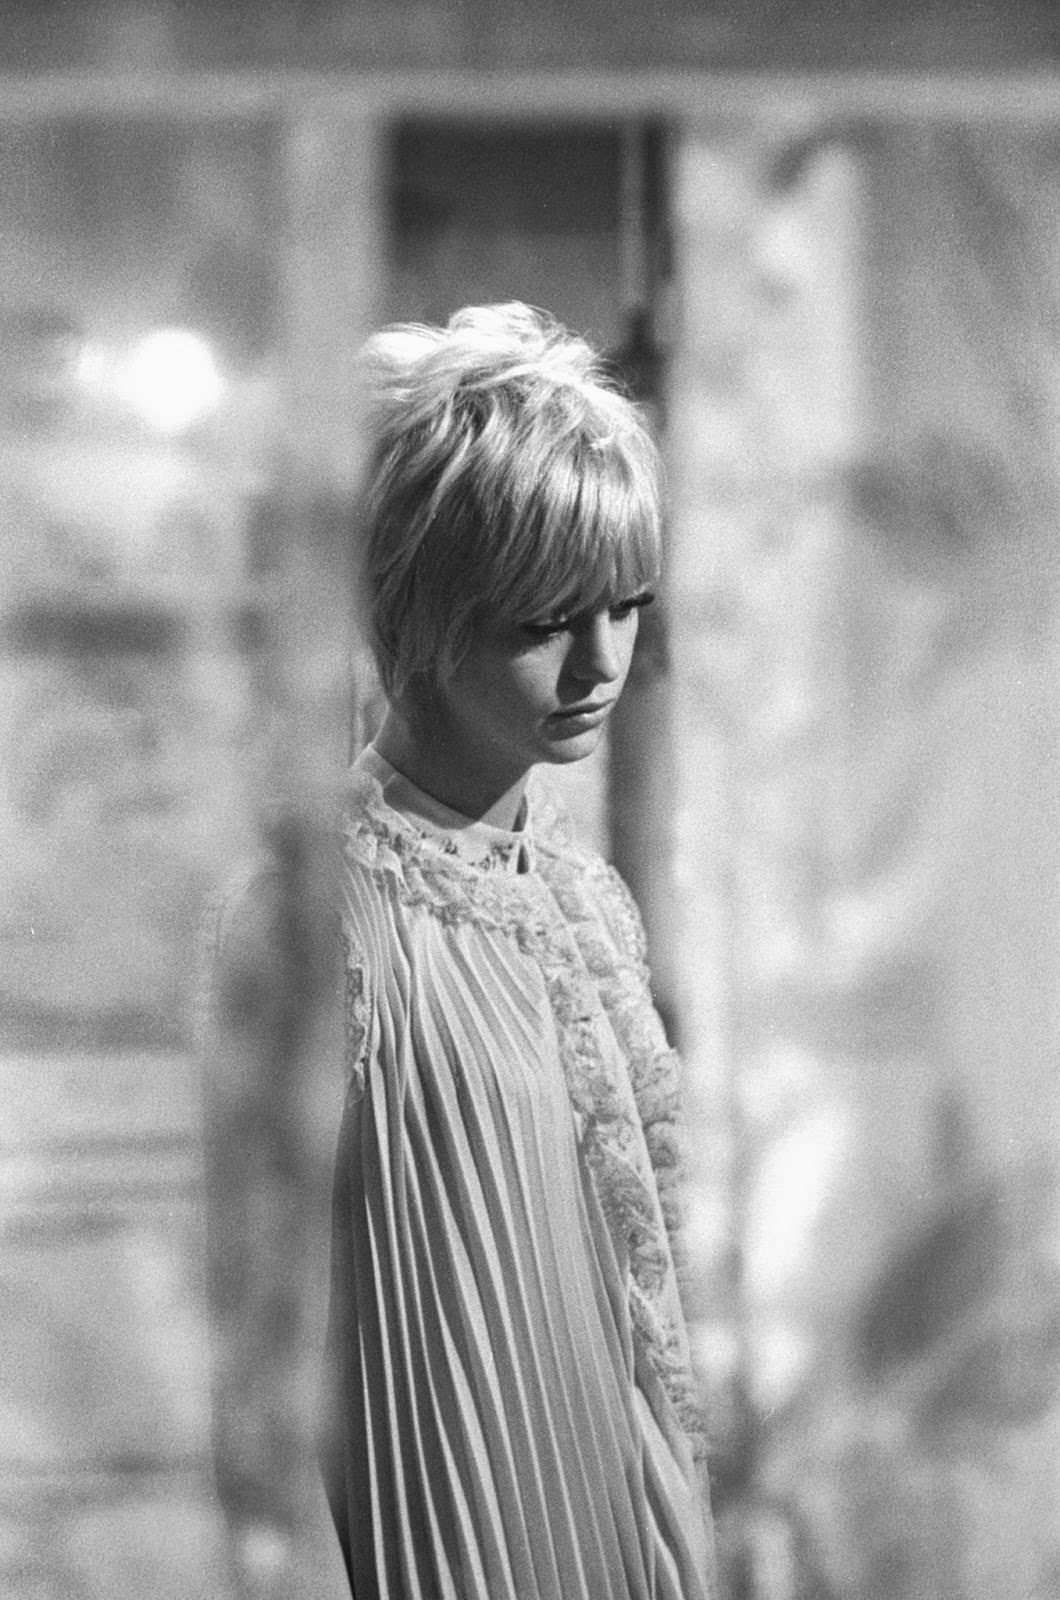 A pensive Goldie Hawn on the Columbia Studios set of "Cactus Flower," 1969